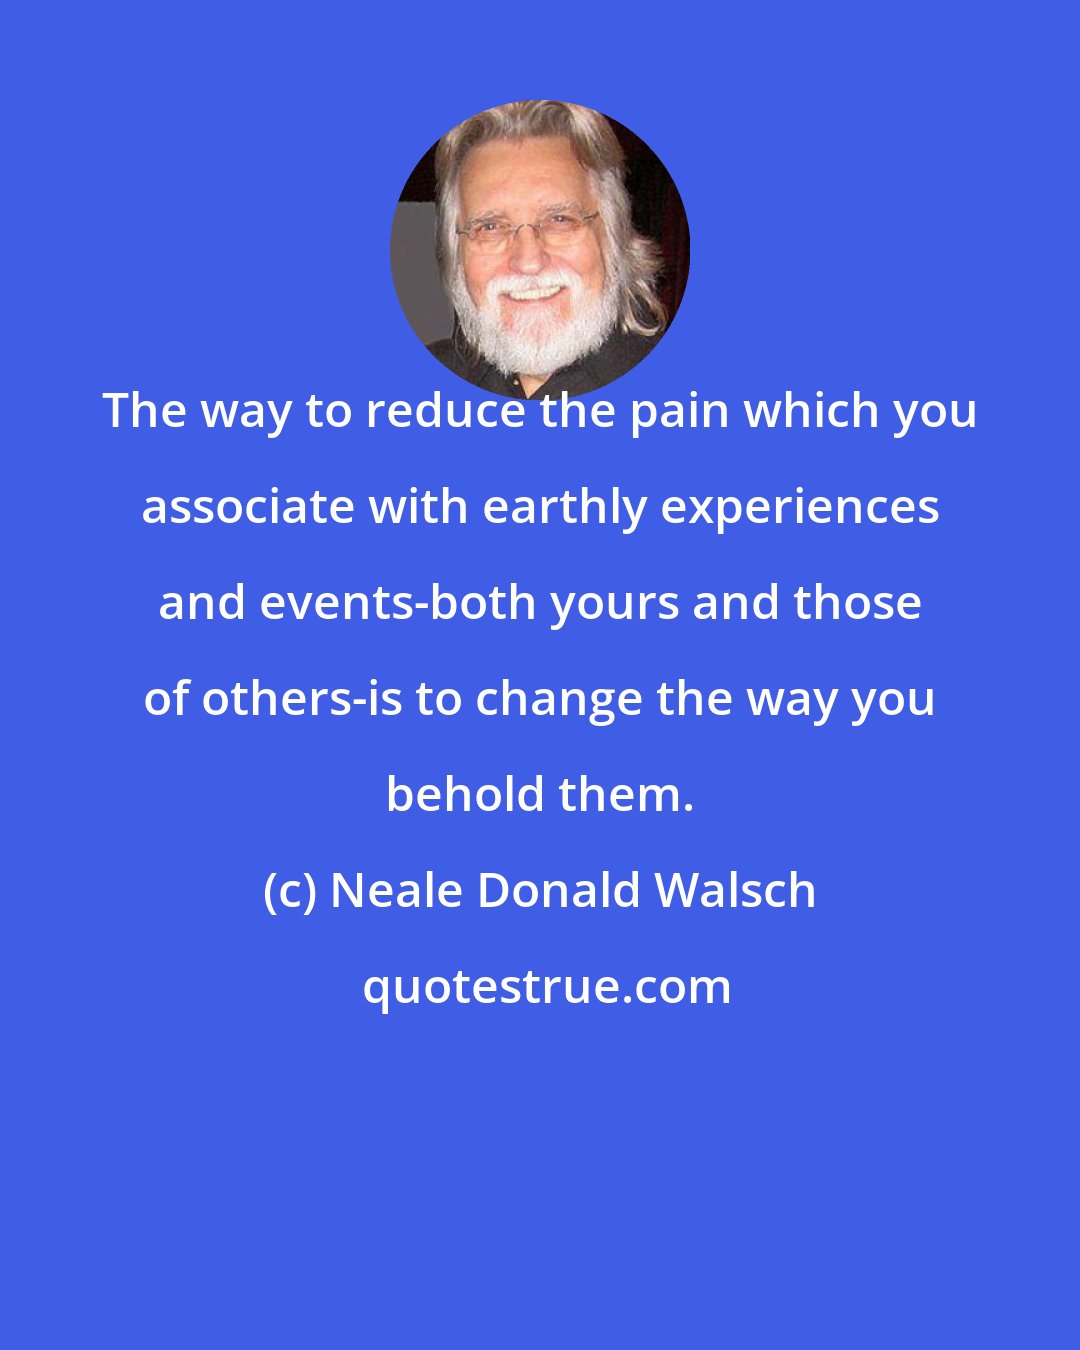 Neale Donald Walsch: The way to reduce the pain which you associate with earthly experiences and events-both yours and those of others-is to change the way you behold them.